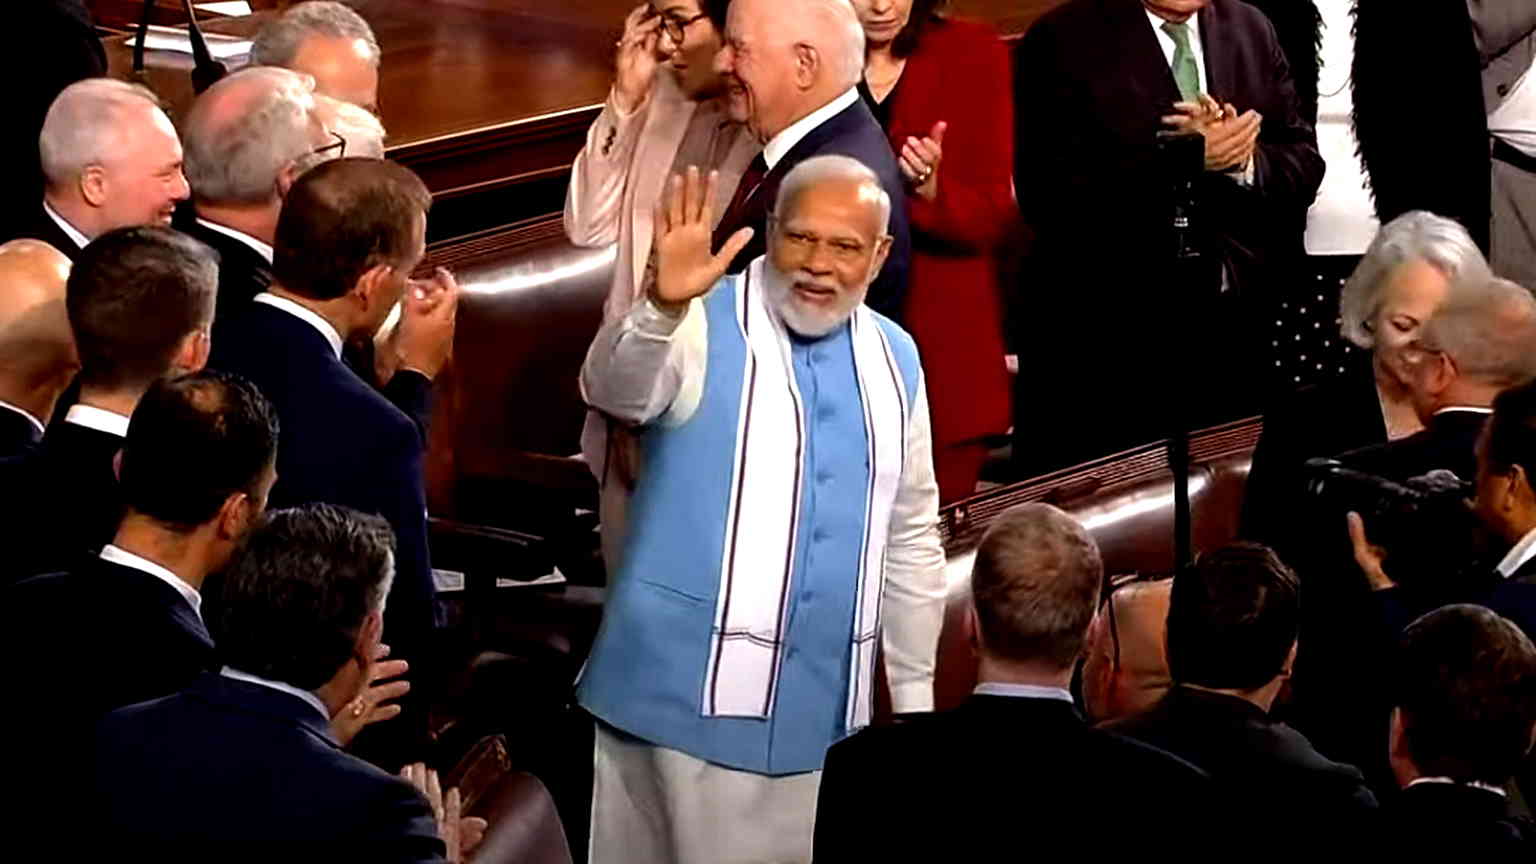 Indian PM Modi’s speech to US Congress draws support, boycotts from lawmakers